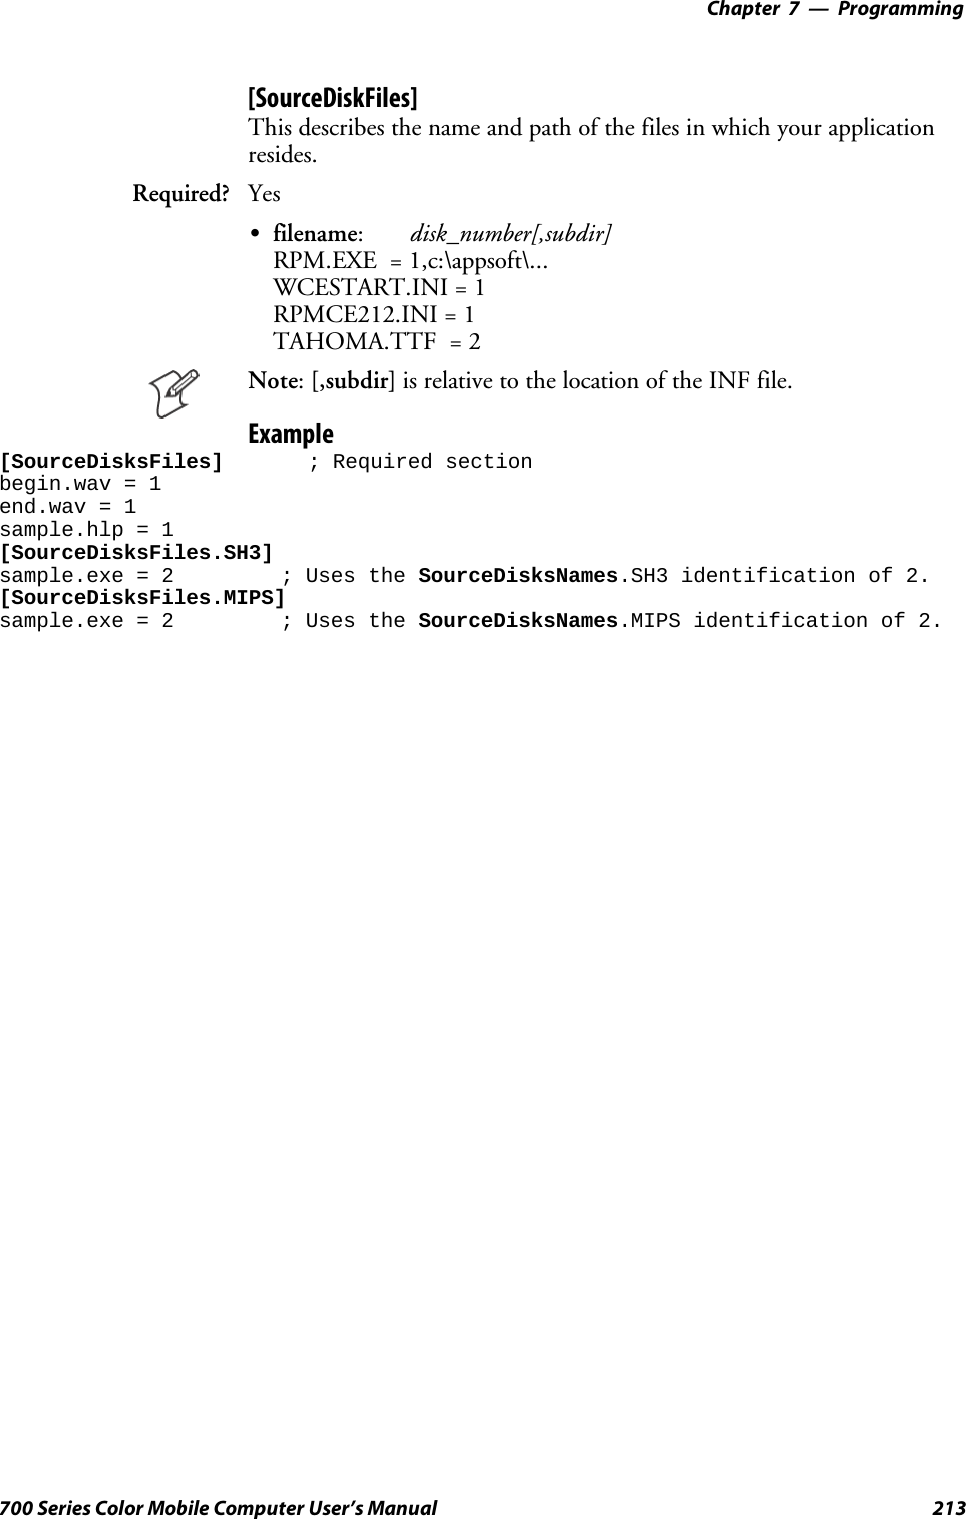 Programming—Chapter 7213700 Series Color Mobile Computer User’s Manual[SourceDiskFiles]This describes the name and path of the files in which your applicationresides.Required? YesSfilename:disk_number[,subdir]RPM.EXE = 1,c:\appsoft\...WCESTART.INI = 1RPMCE212.INI = 1TAHOMA.TTF = 2Note:[,subdir] is relative to the location of the INF file.Example[SourceDisksFiles] ; Required sectionbegin.wav = 1end.wav = 1sample.hlp = 1[SourceDisksFiles.SH3]sample.exe = 2 ; Uses the SourceDisksNames.SH3 identification of 2.[SourceDisksFiles.MIPS]sample.exe = 2 ; Uses the SourceDisksNames.MIPS identification of 2.